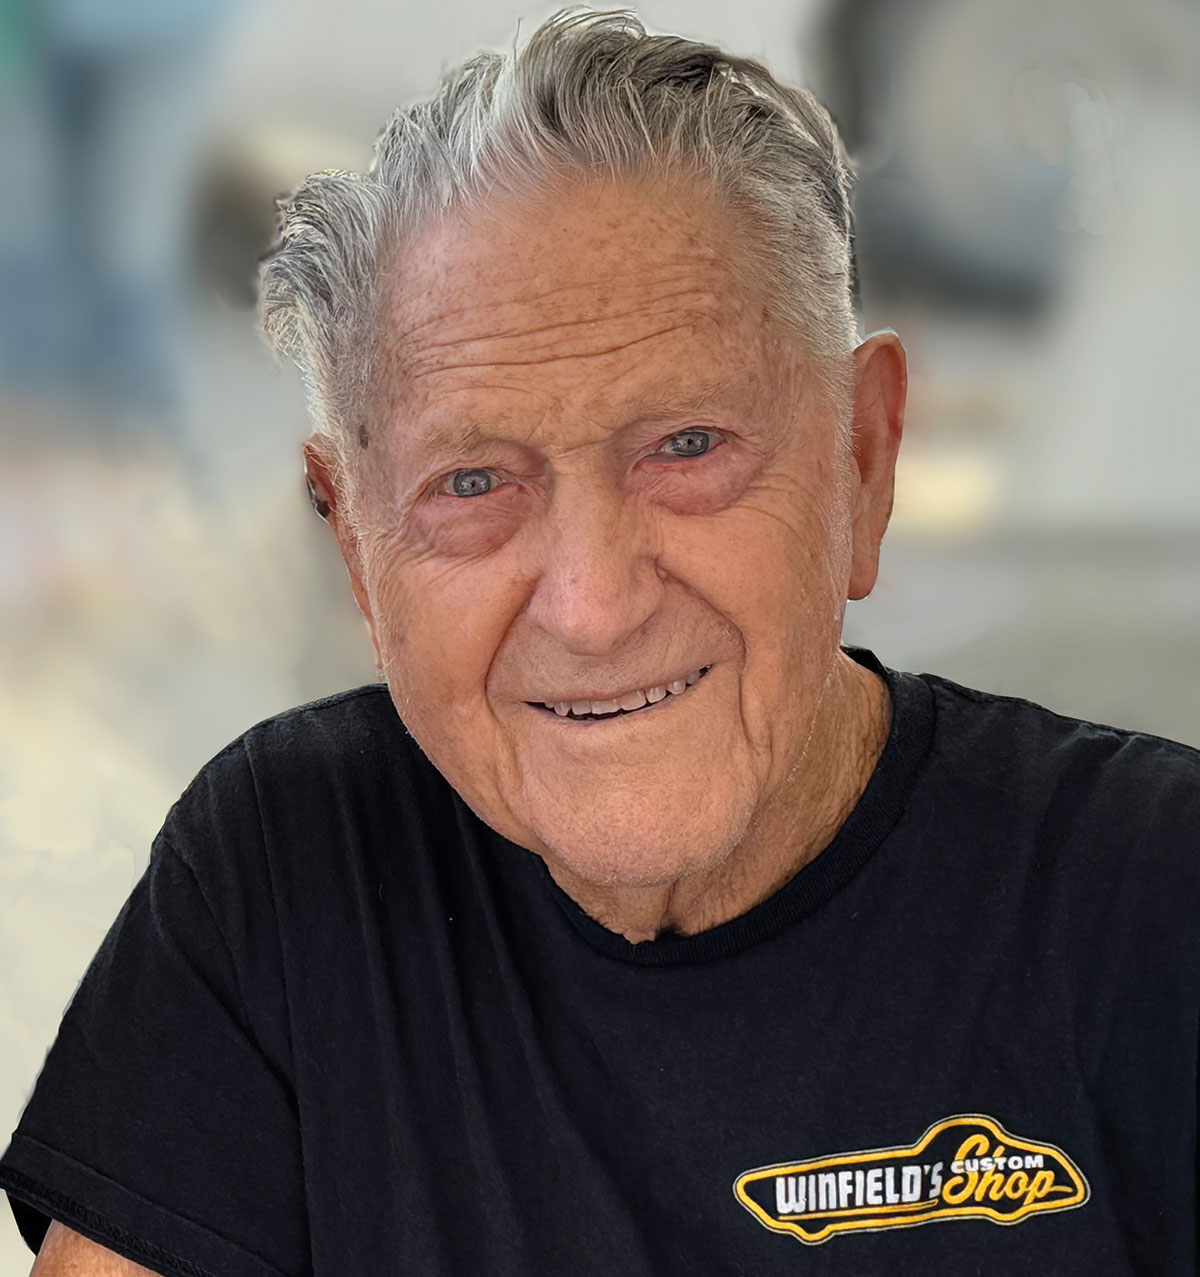 Close-up portrait headshot photograph perspective of Gene Winfield smiling in a black graphic t-shirt that shows a small Winfield's Custom Shop white/yellow logo